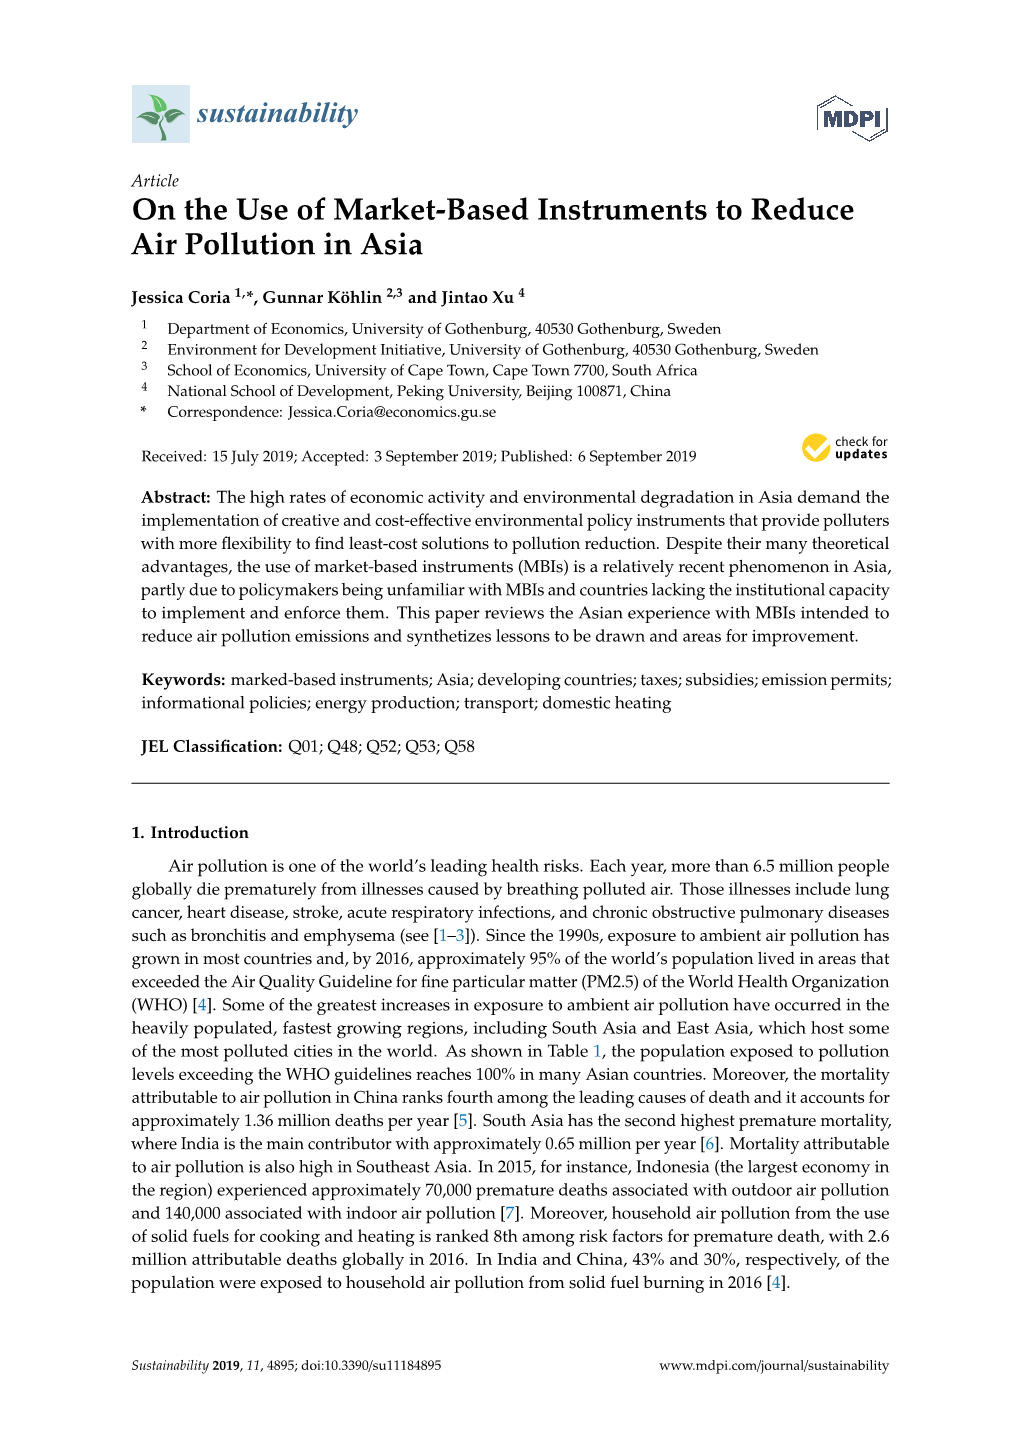 On the Use of Market-Based Instruments to Reduce Air Pollution in Asia